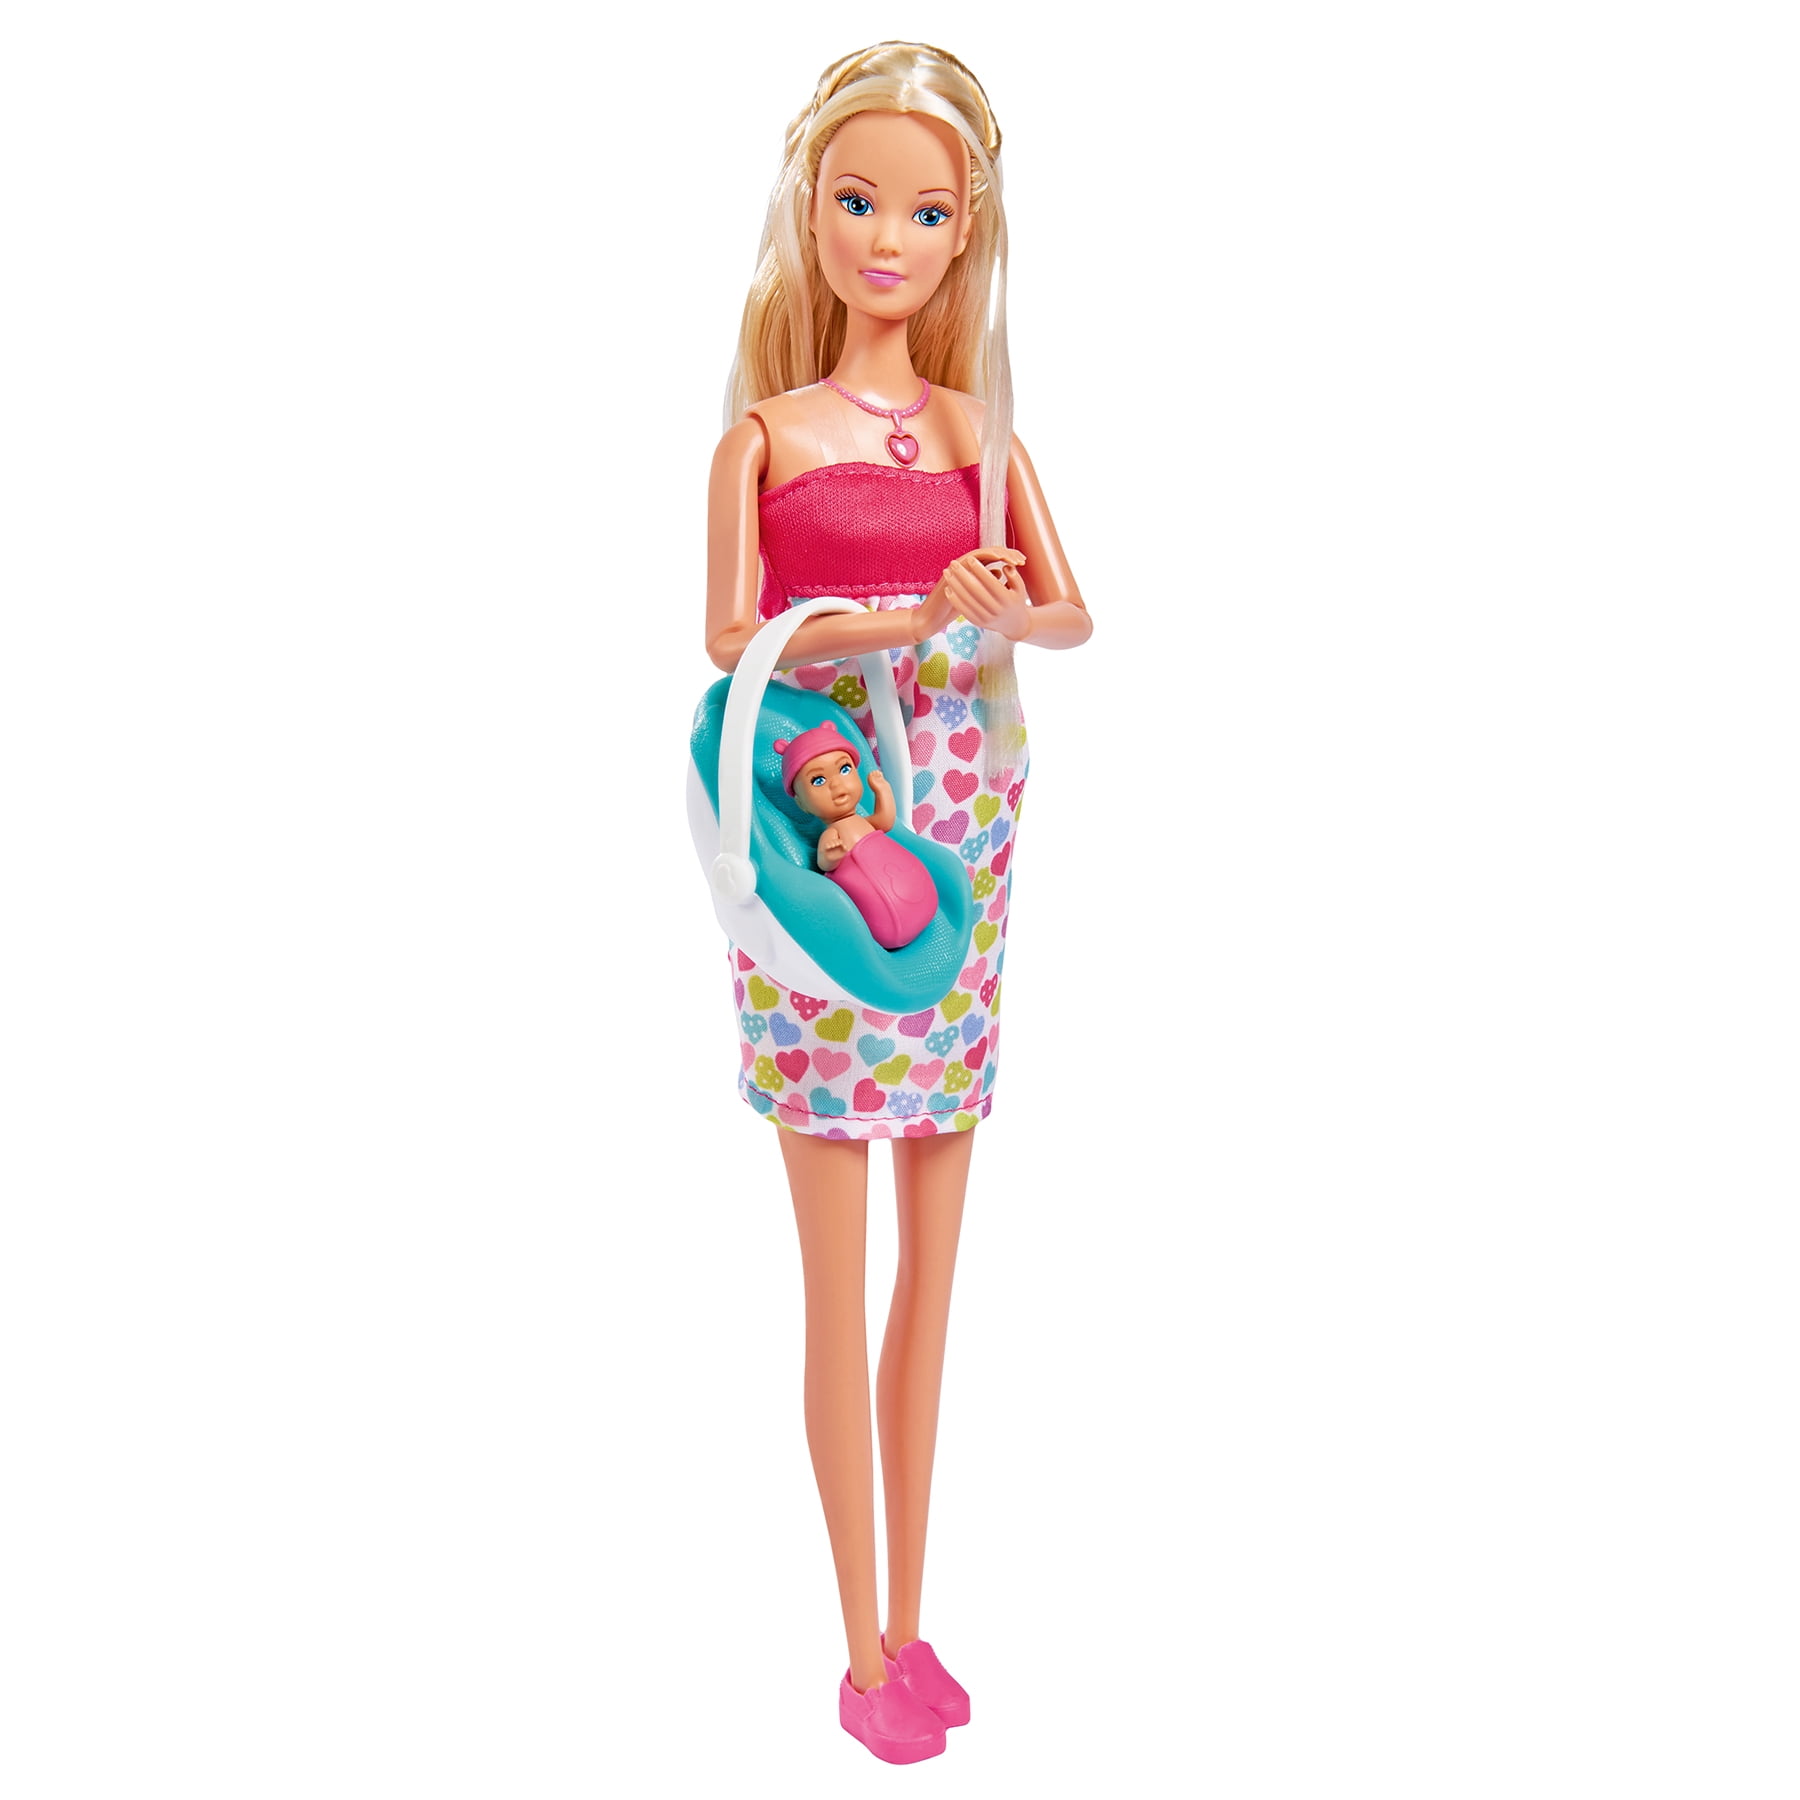 Removable Tummy Baby With Accessories Steffi Love Barbie Girl Pregnant Doll Toy 